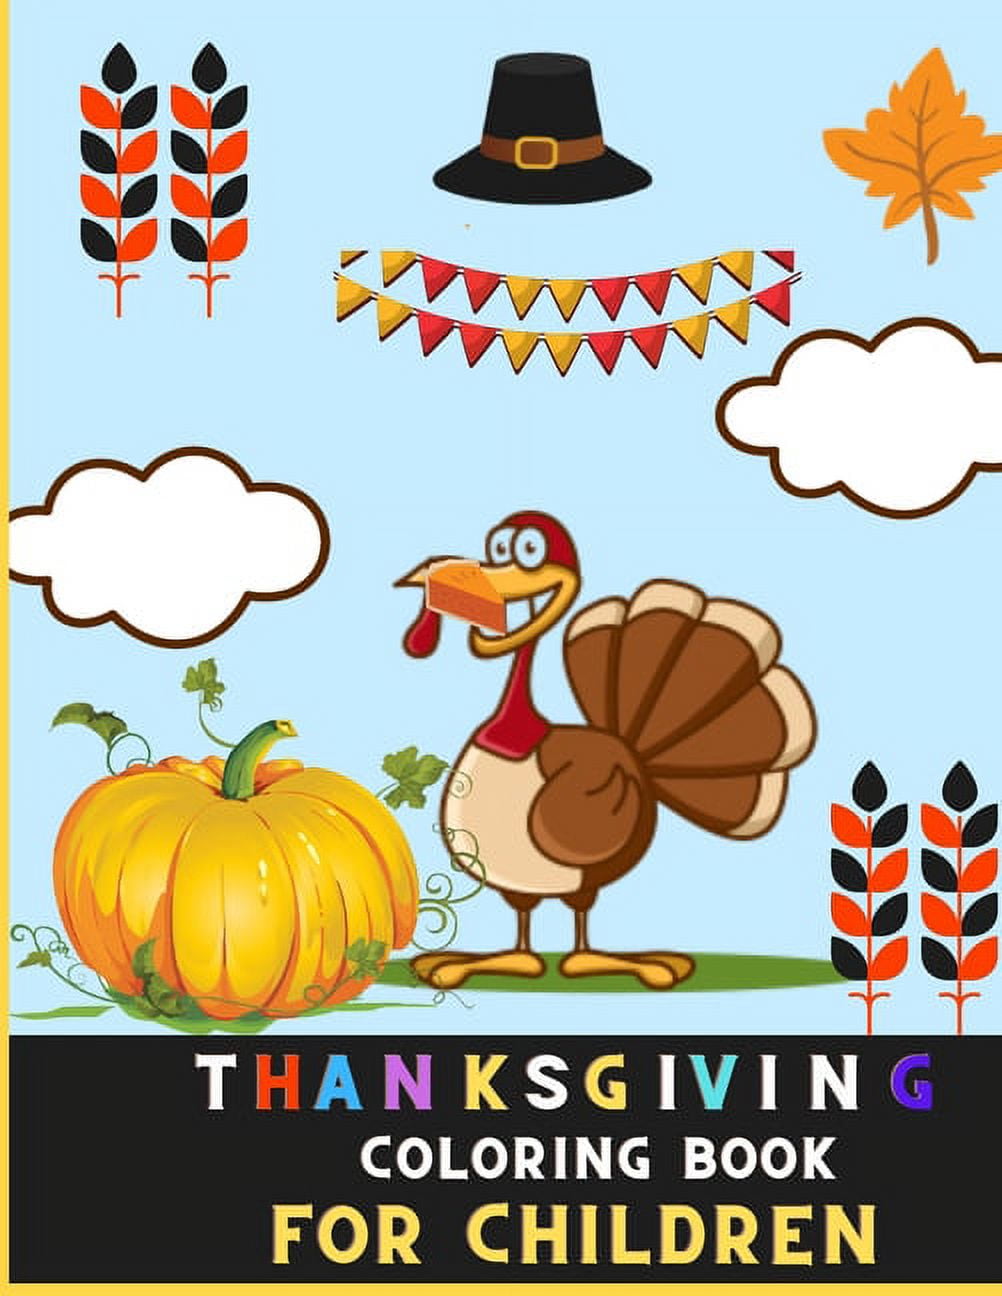 Thanksgiving coloring book for children awesome collection of fun and easy thanksgiving coloring pages for kids toddlers childrens and preschoolers paperback